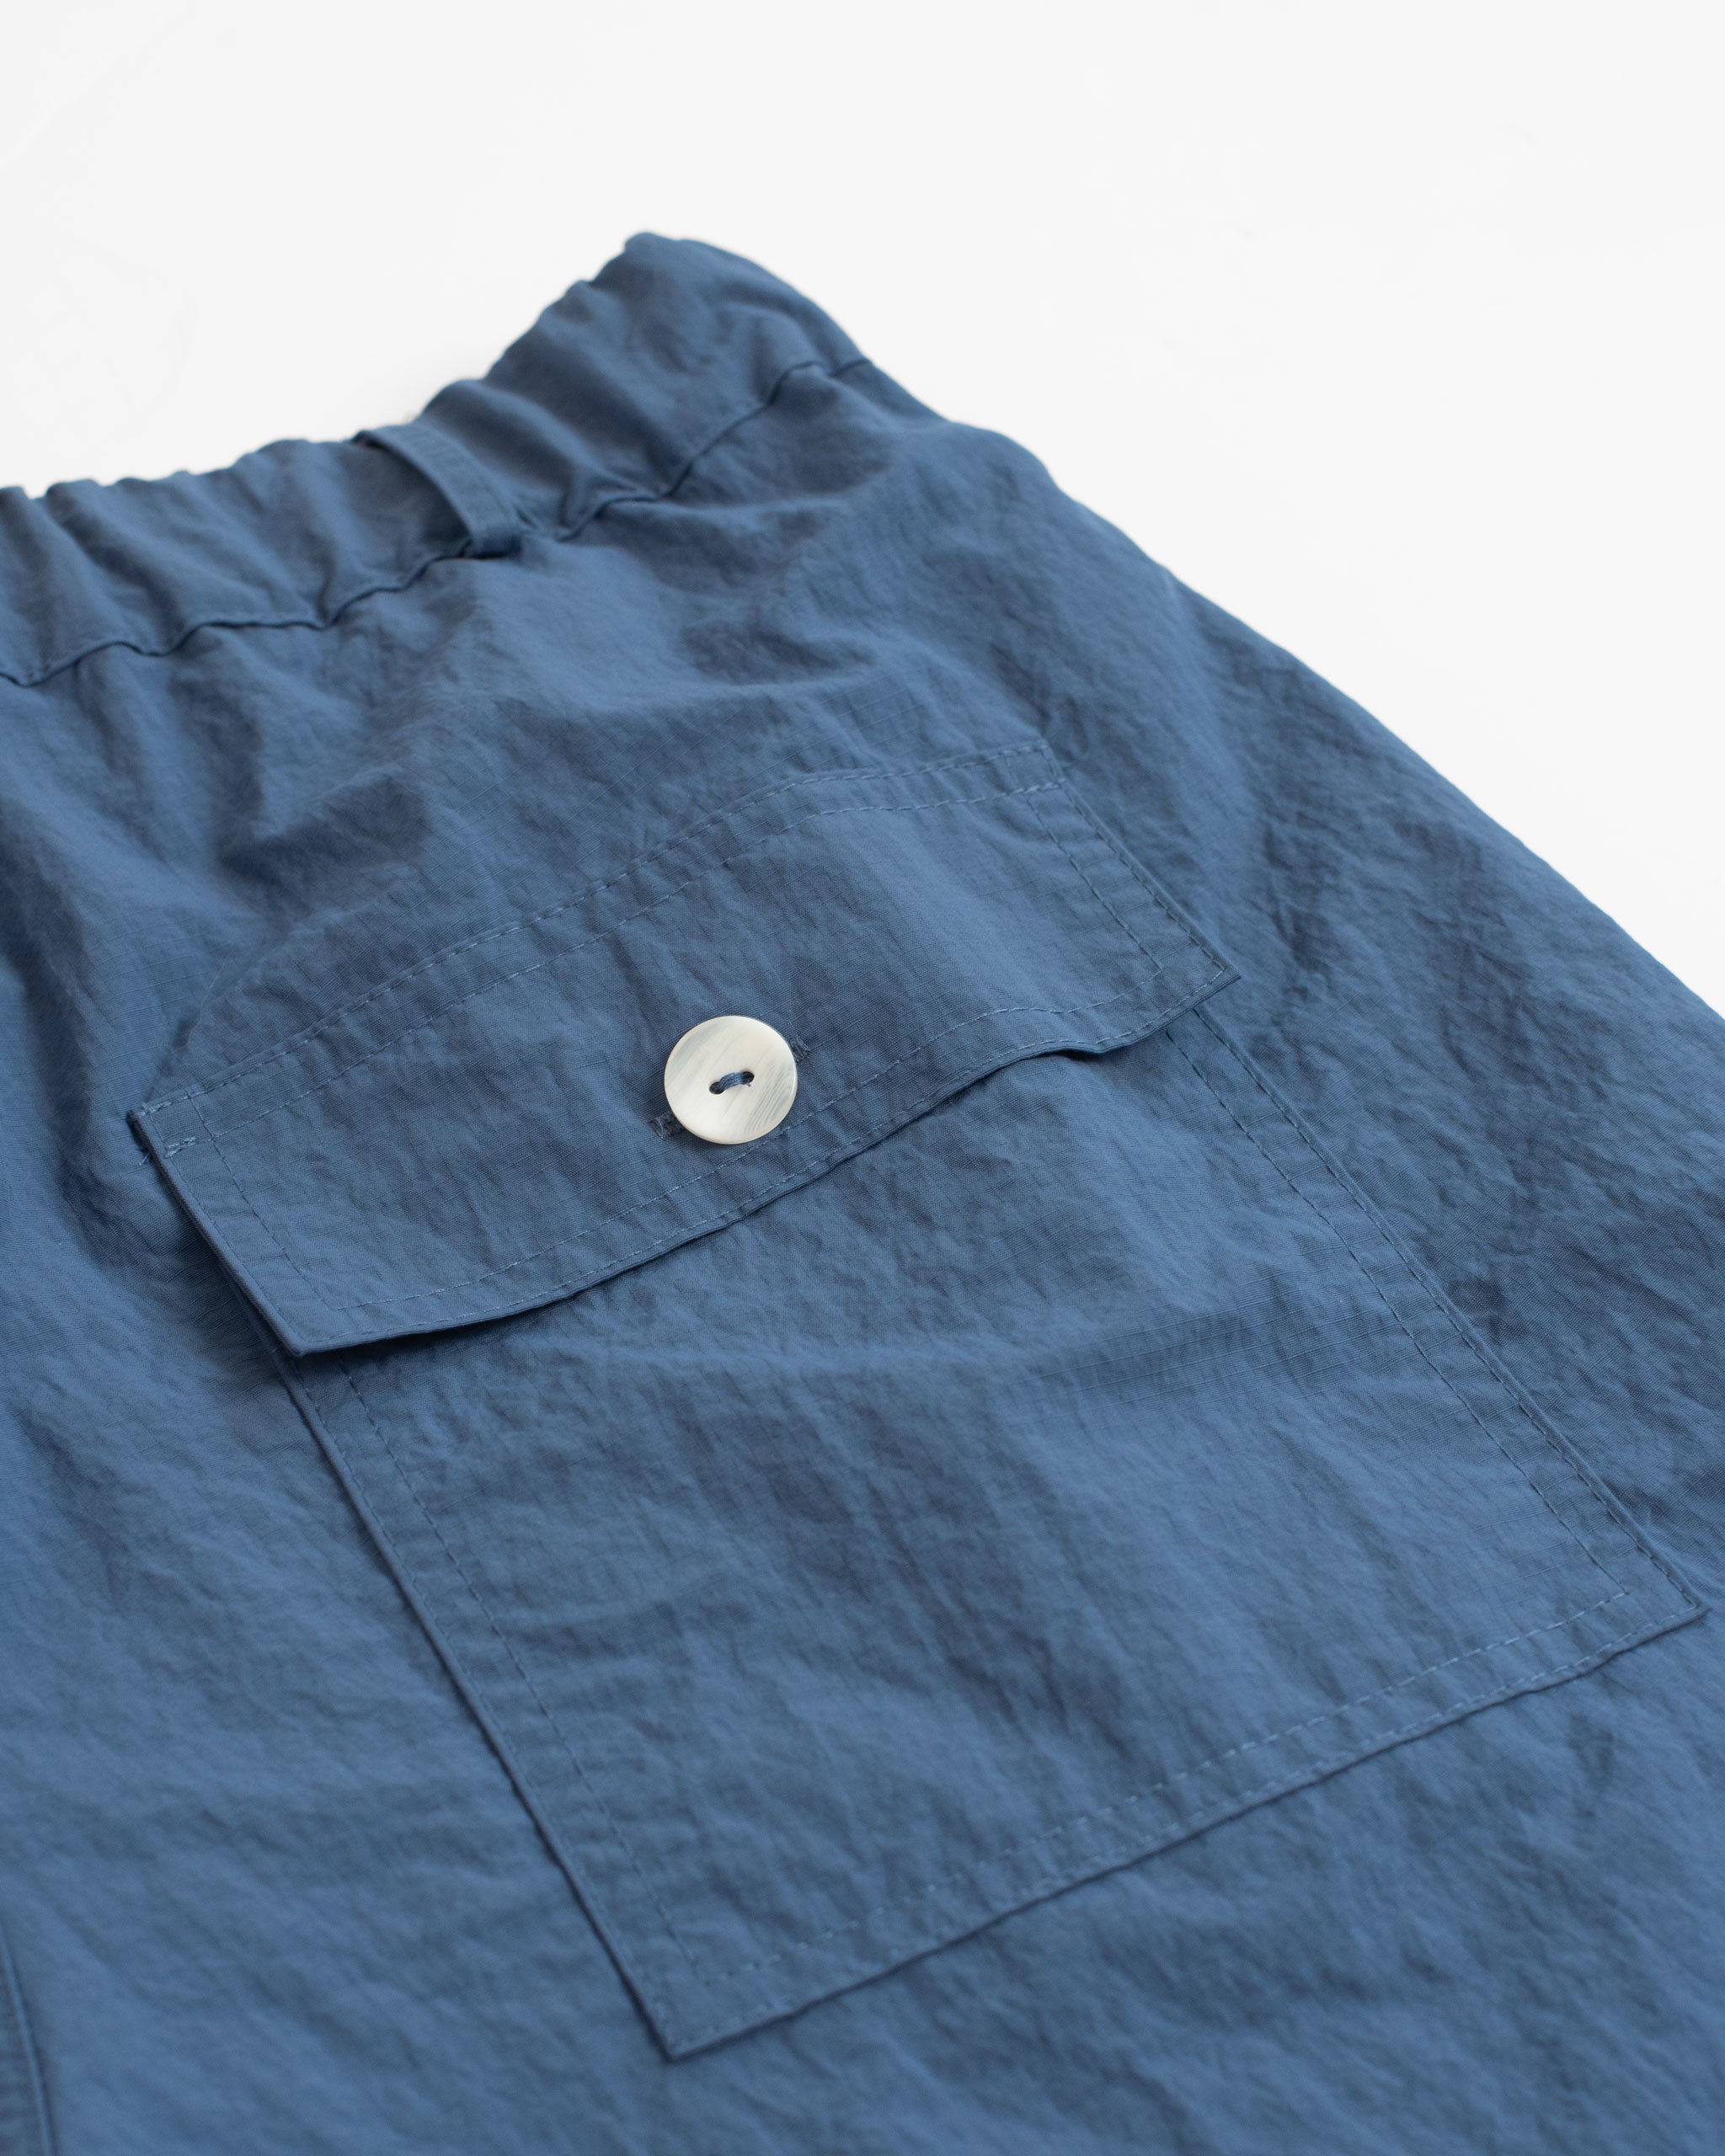 back pocket shot of Solid blue utility shorts in ripstop nylon